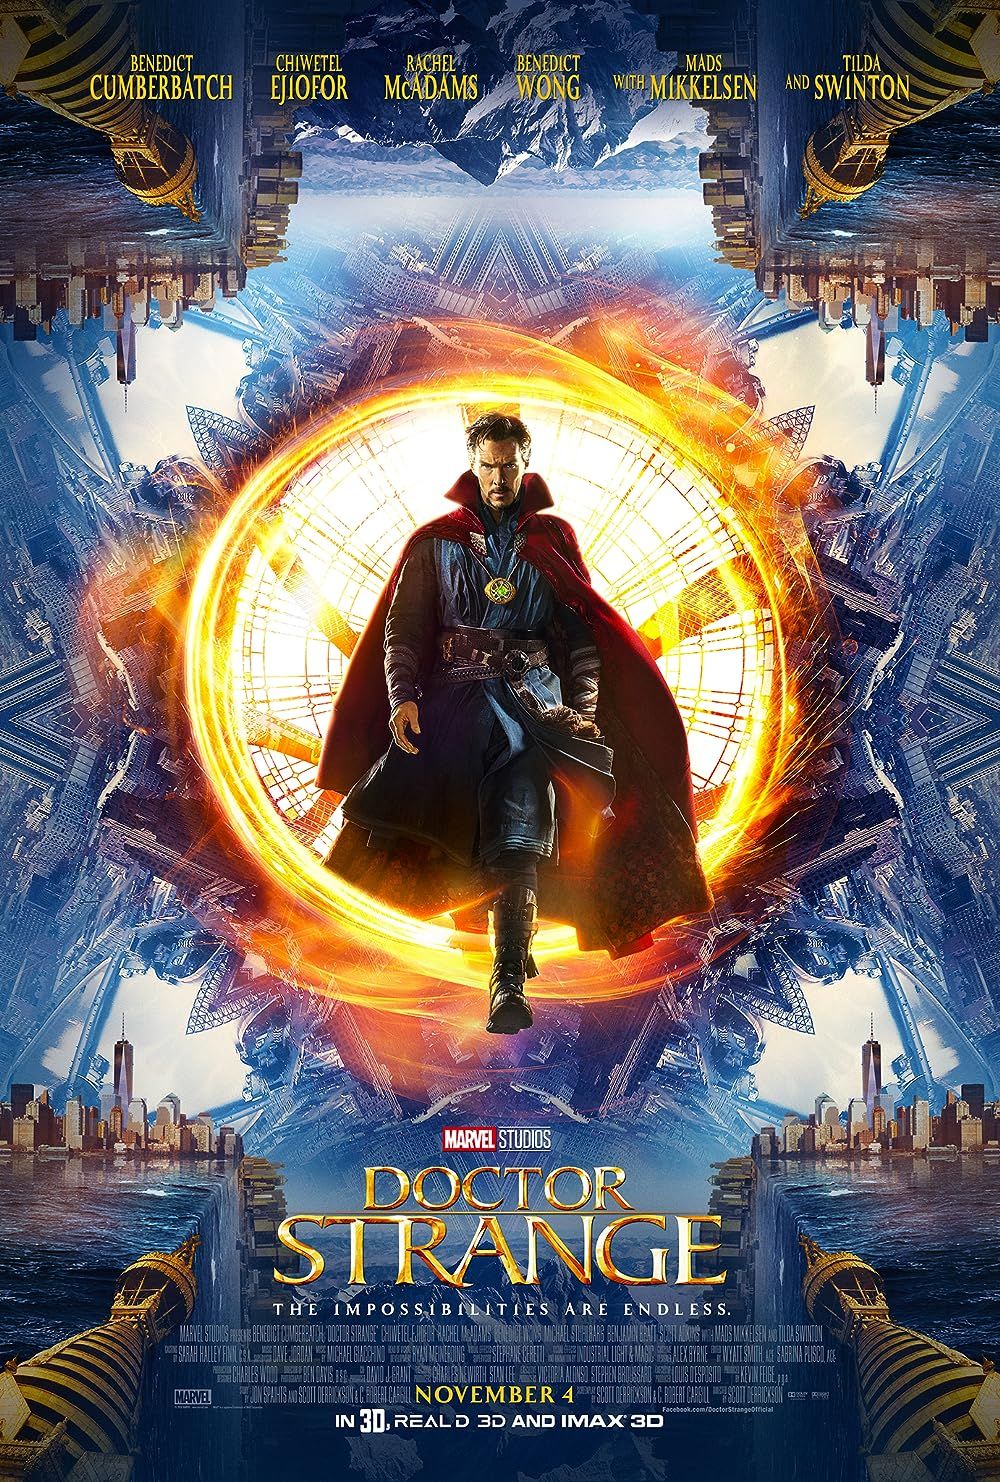 Benedict Cumberbatch as Doctor Strange on the 2016 movie poster